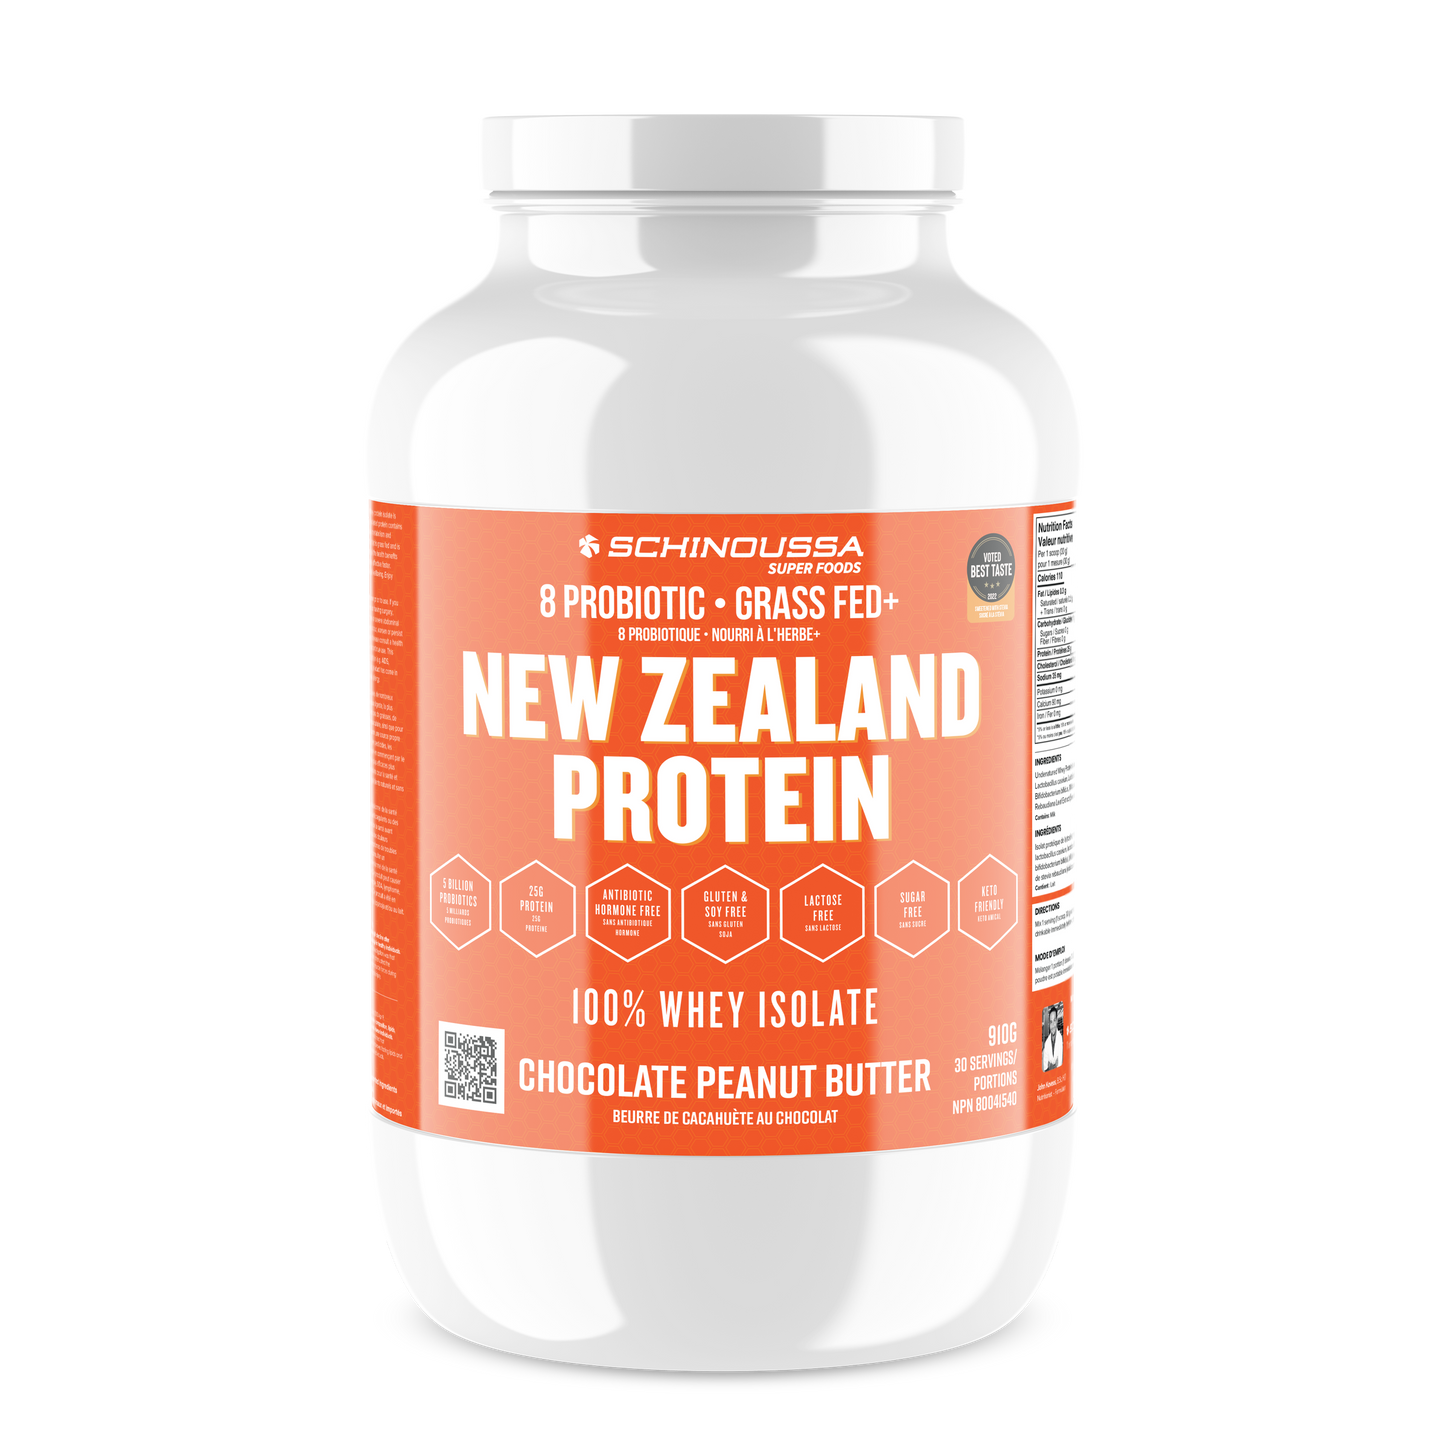 NZ PROBIOTIC WHEY ISO PEANUT BUTTER CHOCOLATE 2LBS